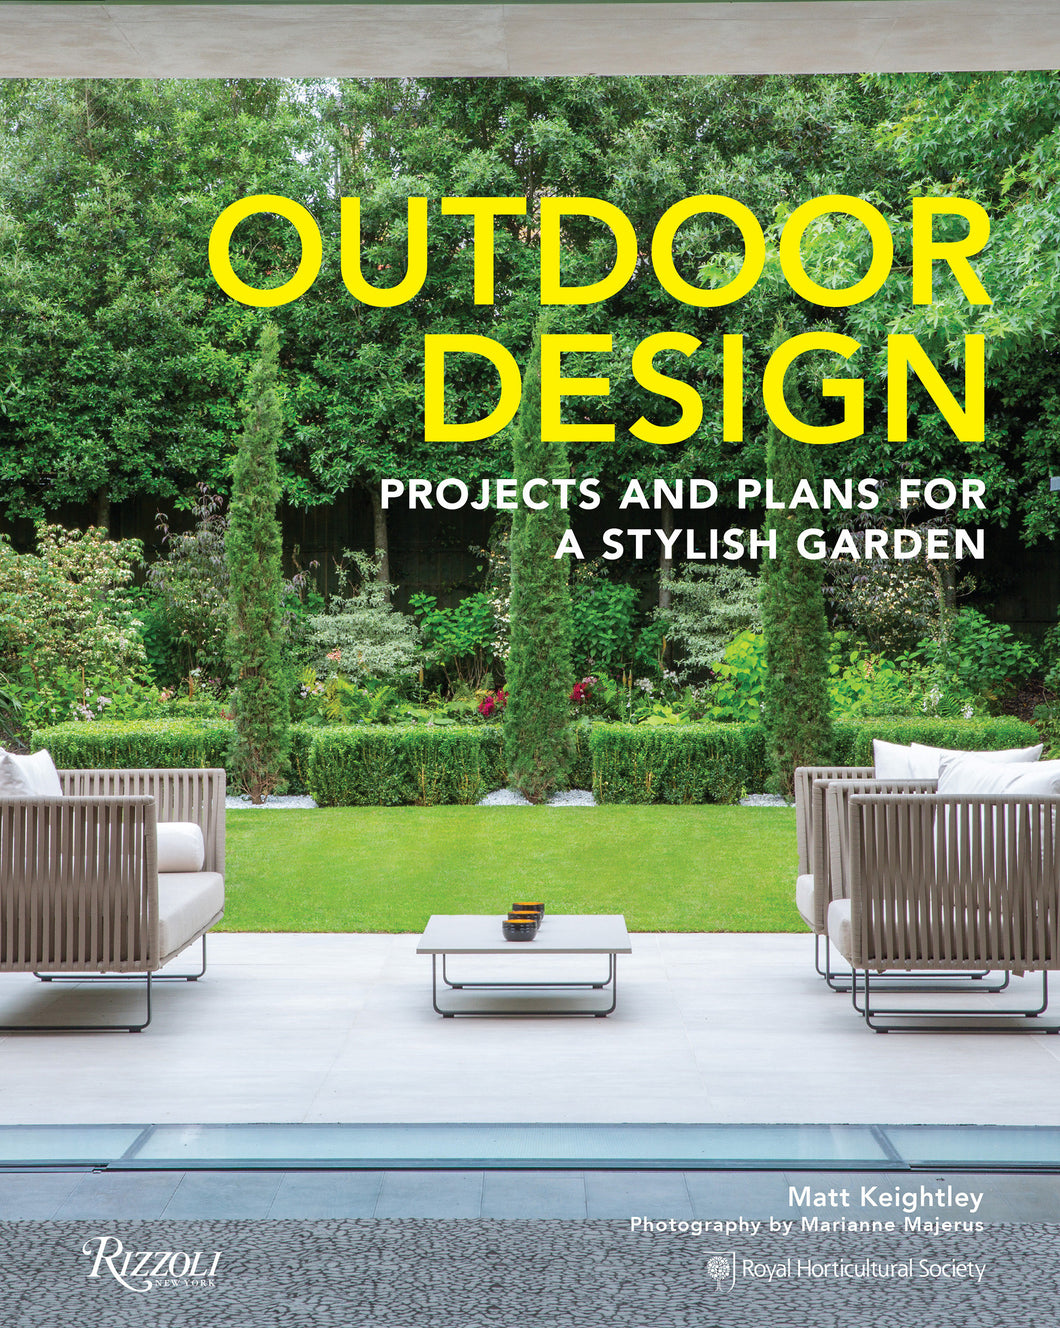 Outdoor Design: Projects and Plans for a Stylish Garden